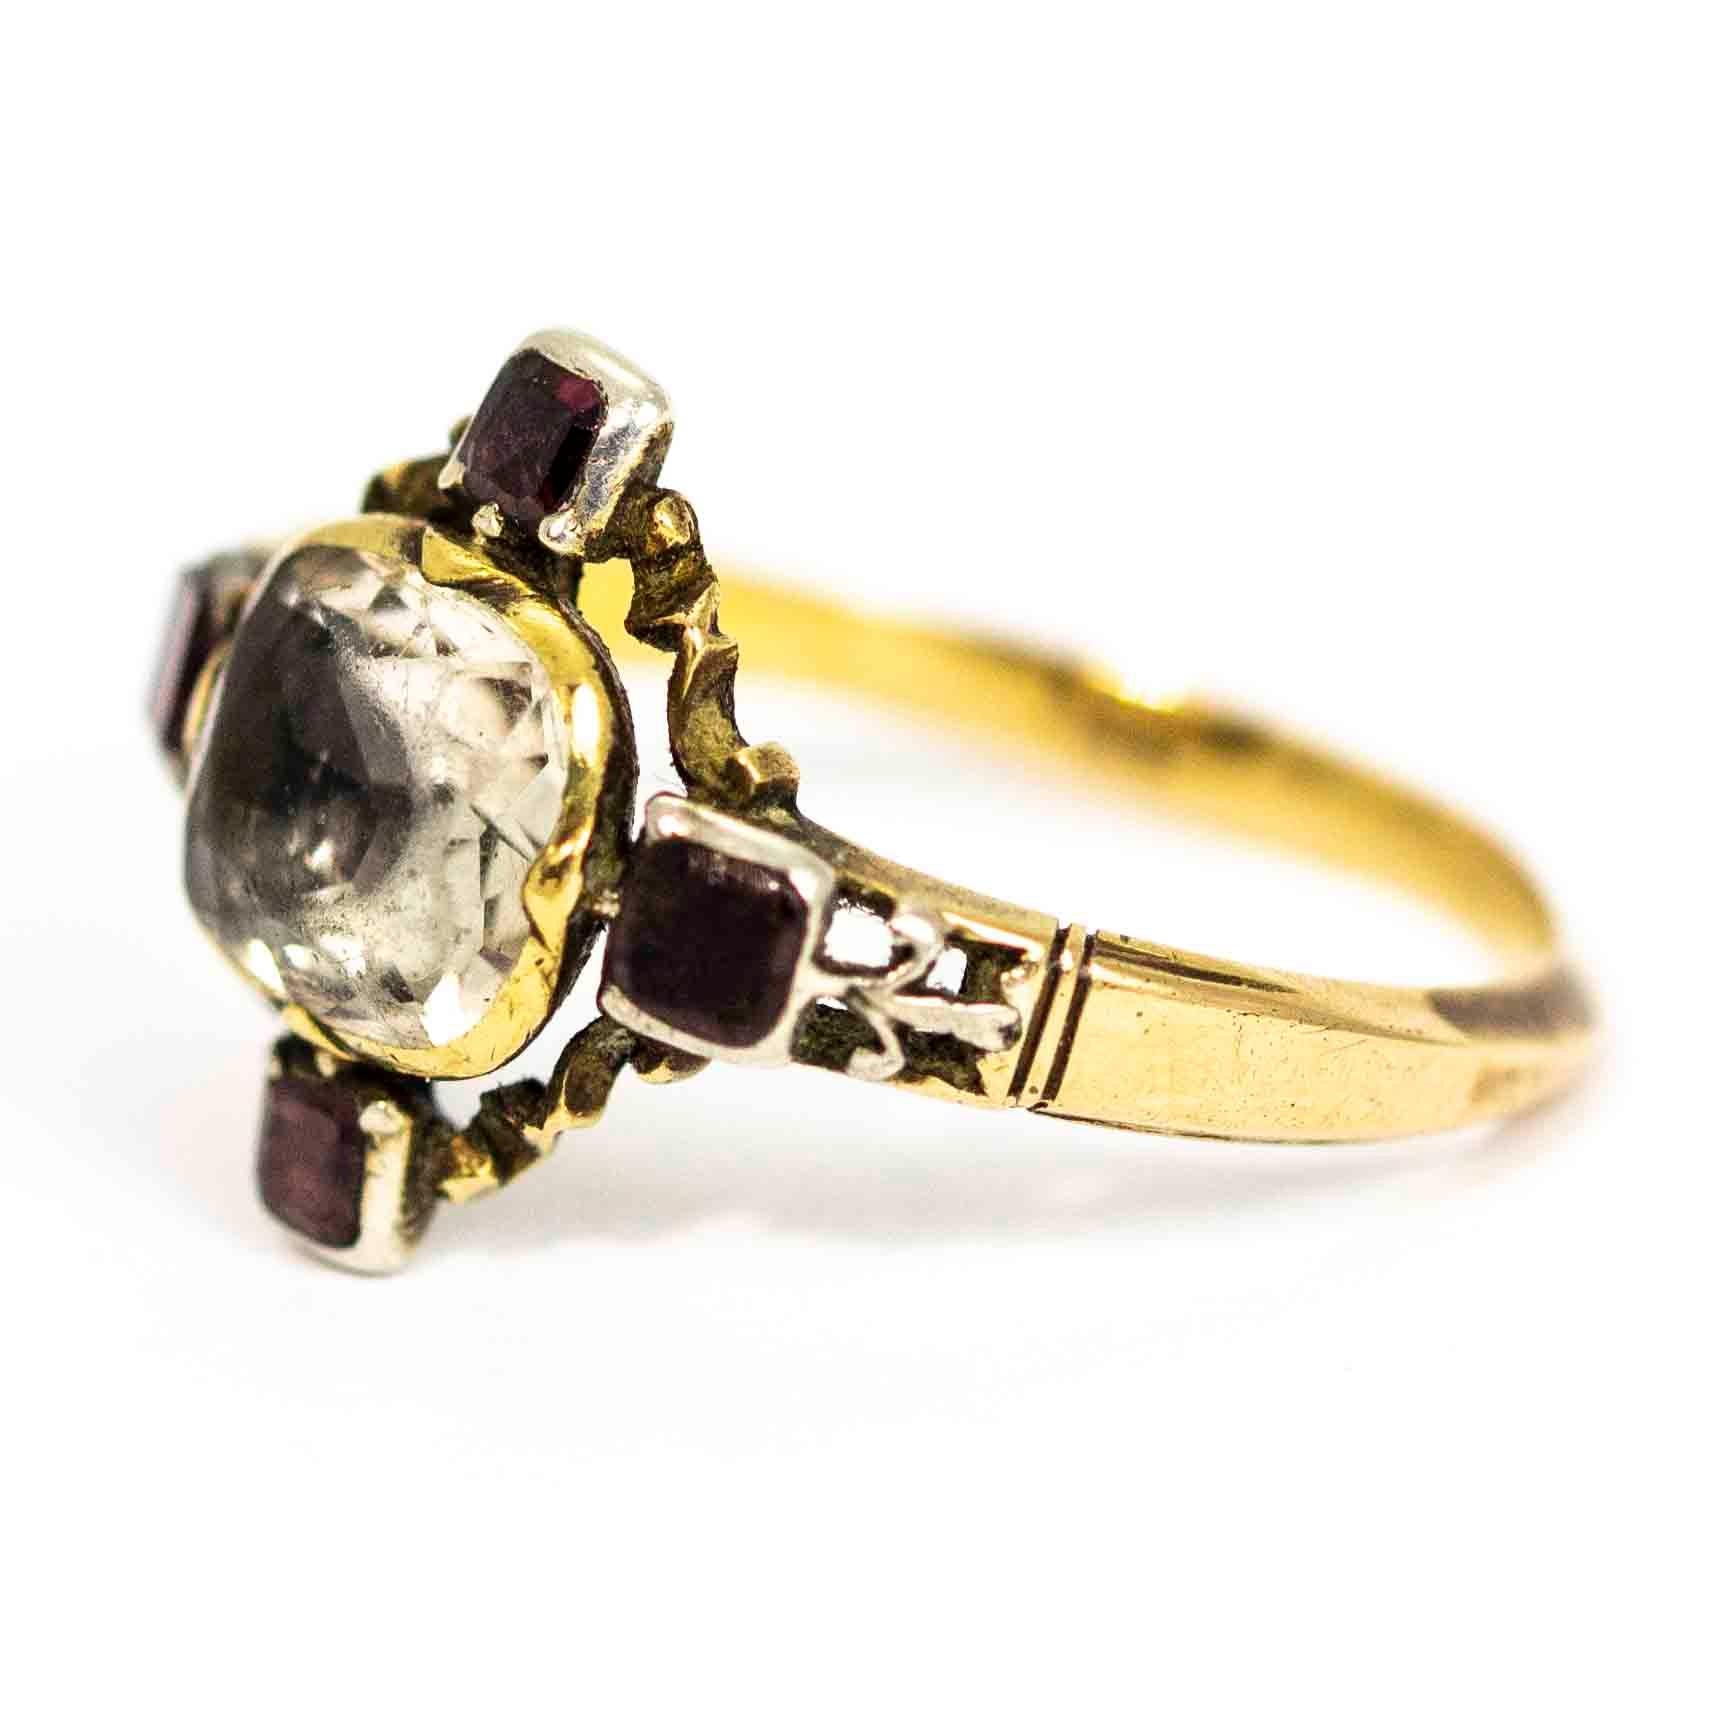 A spectacular antique Georgian ring. Centred with a wonderful chrysoprase bordered on all sized by beautiful flat cut garnets. The garnets are joined in superb ornate gallery between elegant open work shoulders. Modelled in 15 carat yellow gold.

